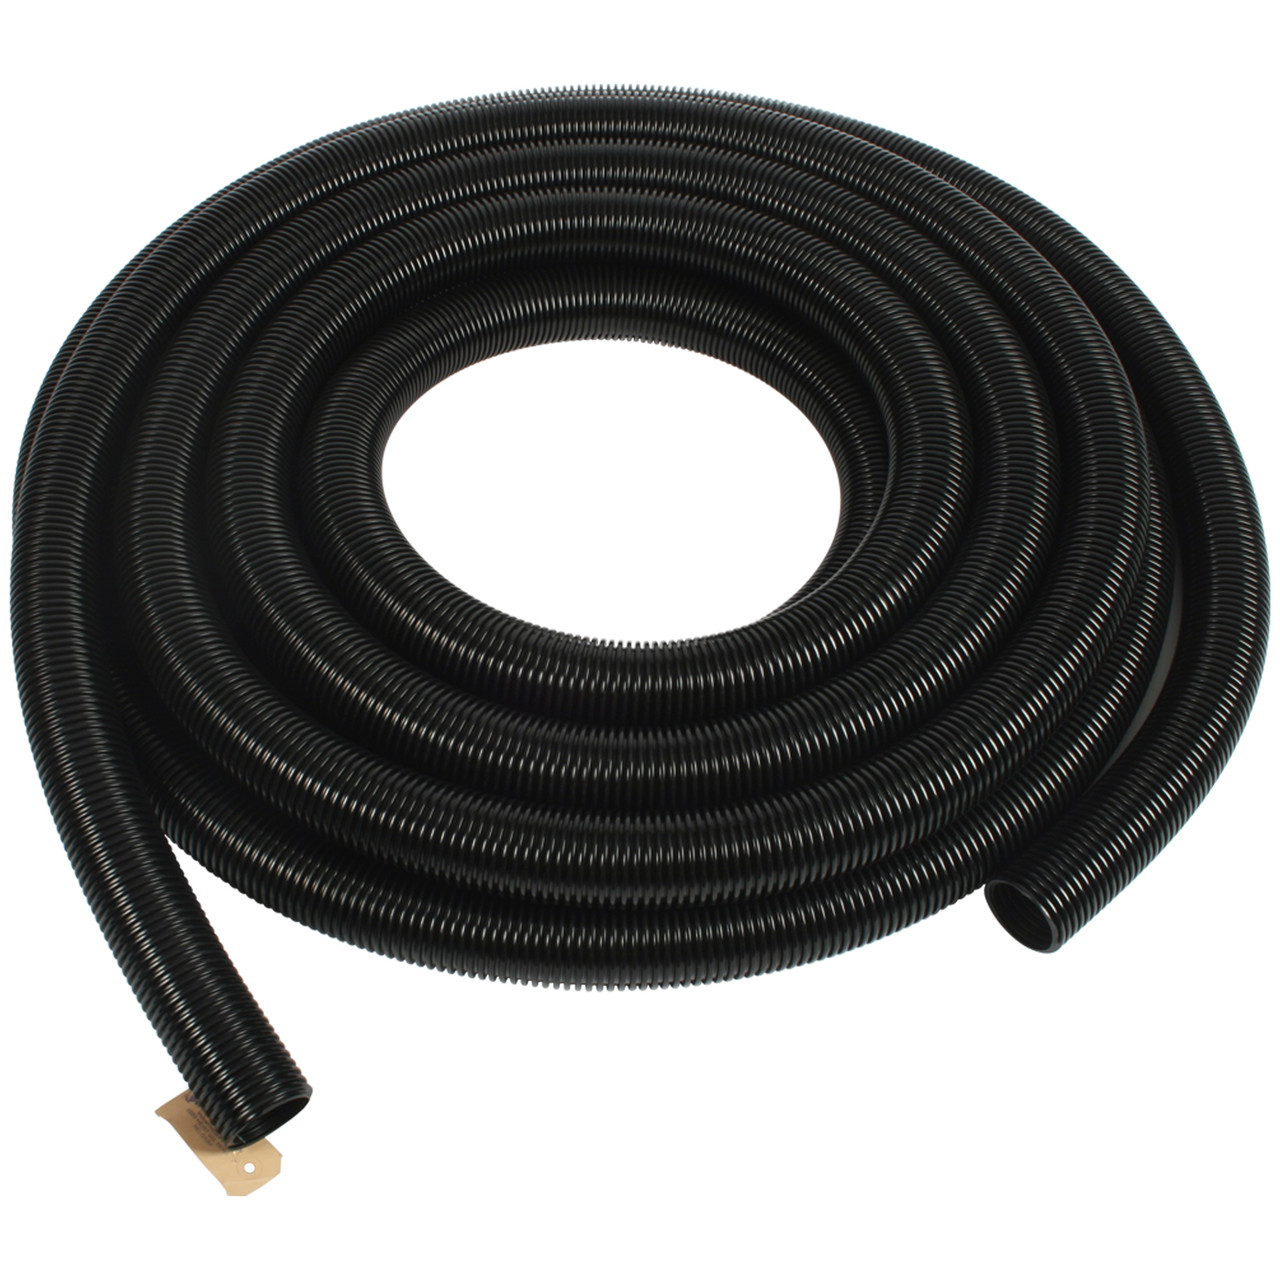 Cen-Tec Systems 60110 Gray 50 Foot Vacuum Hose with 2 inch Diameter